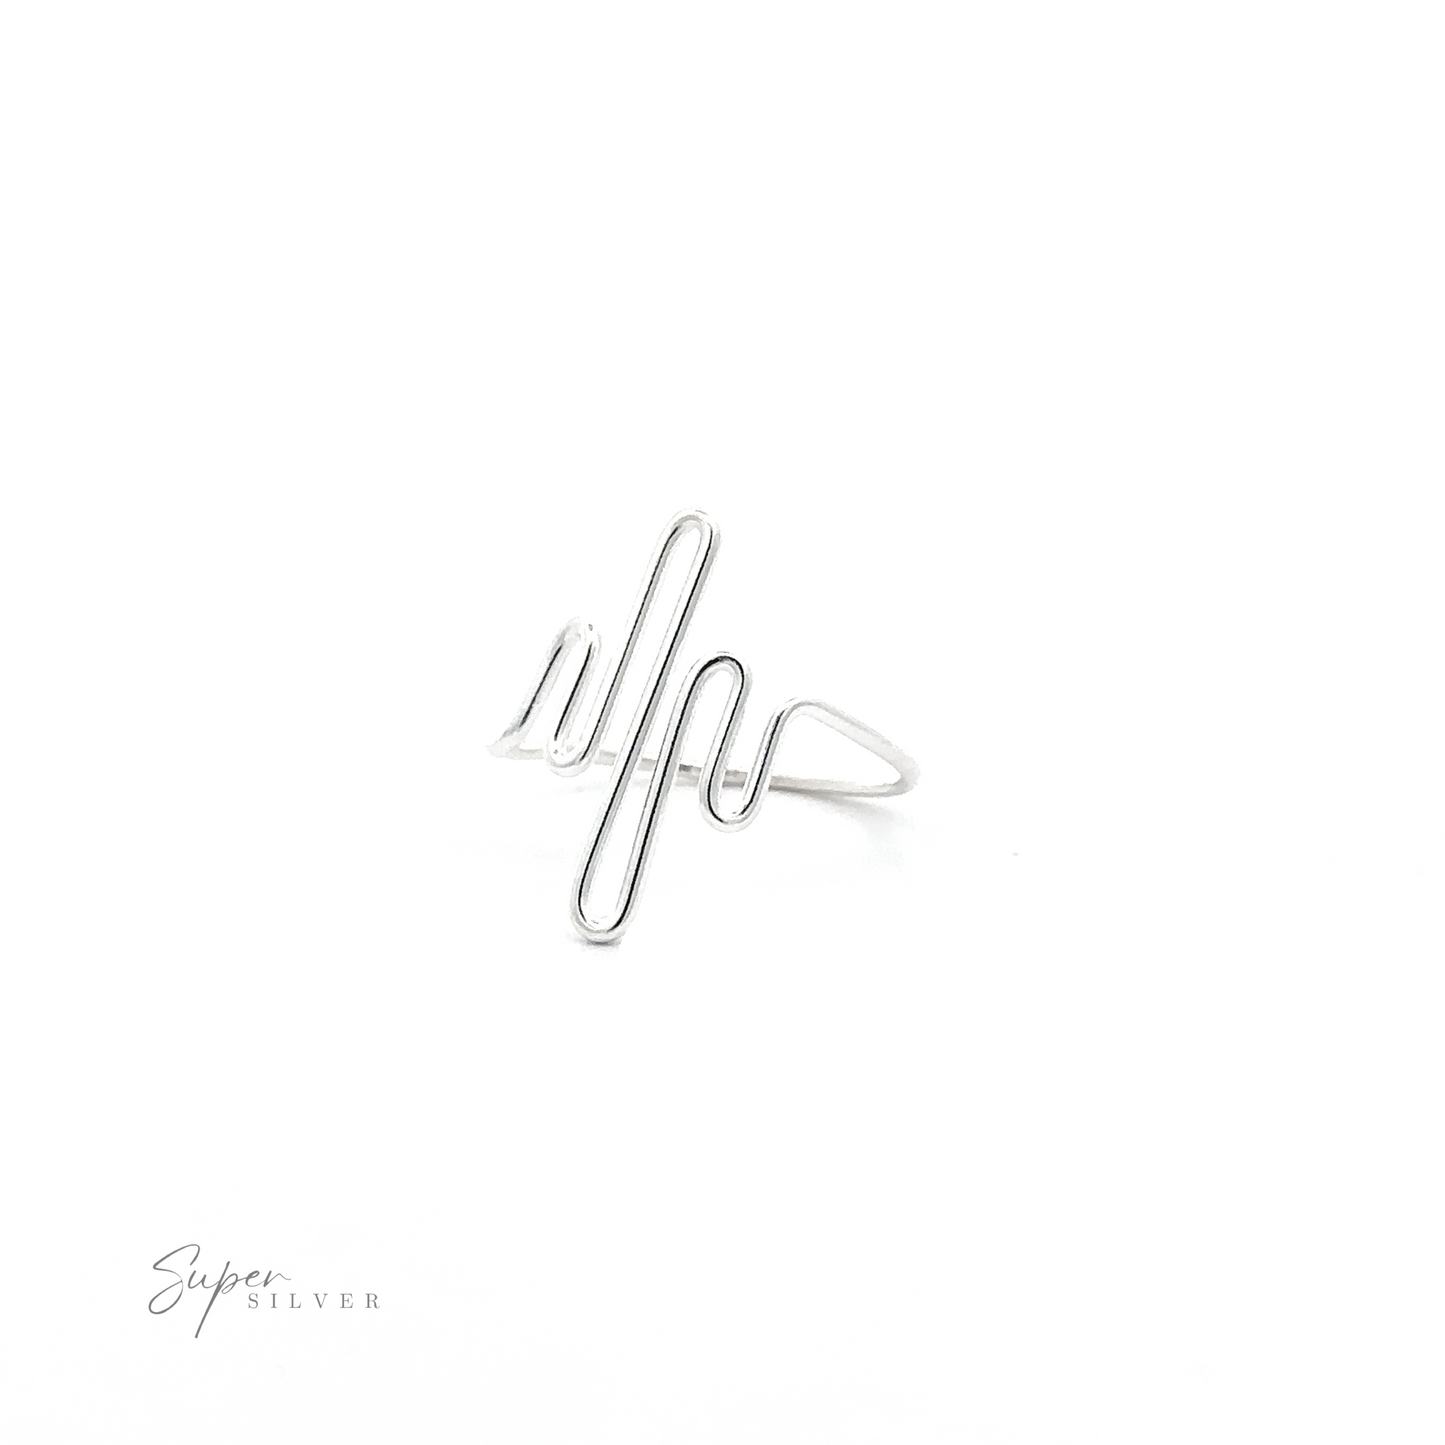 A minimalist Silver Squiggle Ring with a whimsical wave pattern - a unique accent piece.